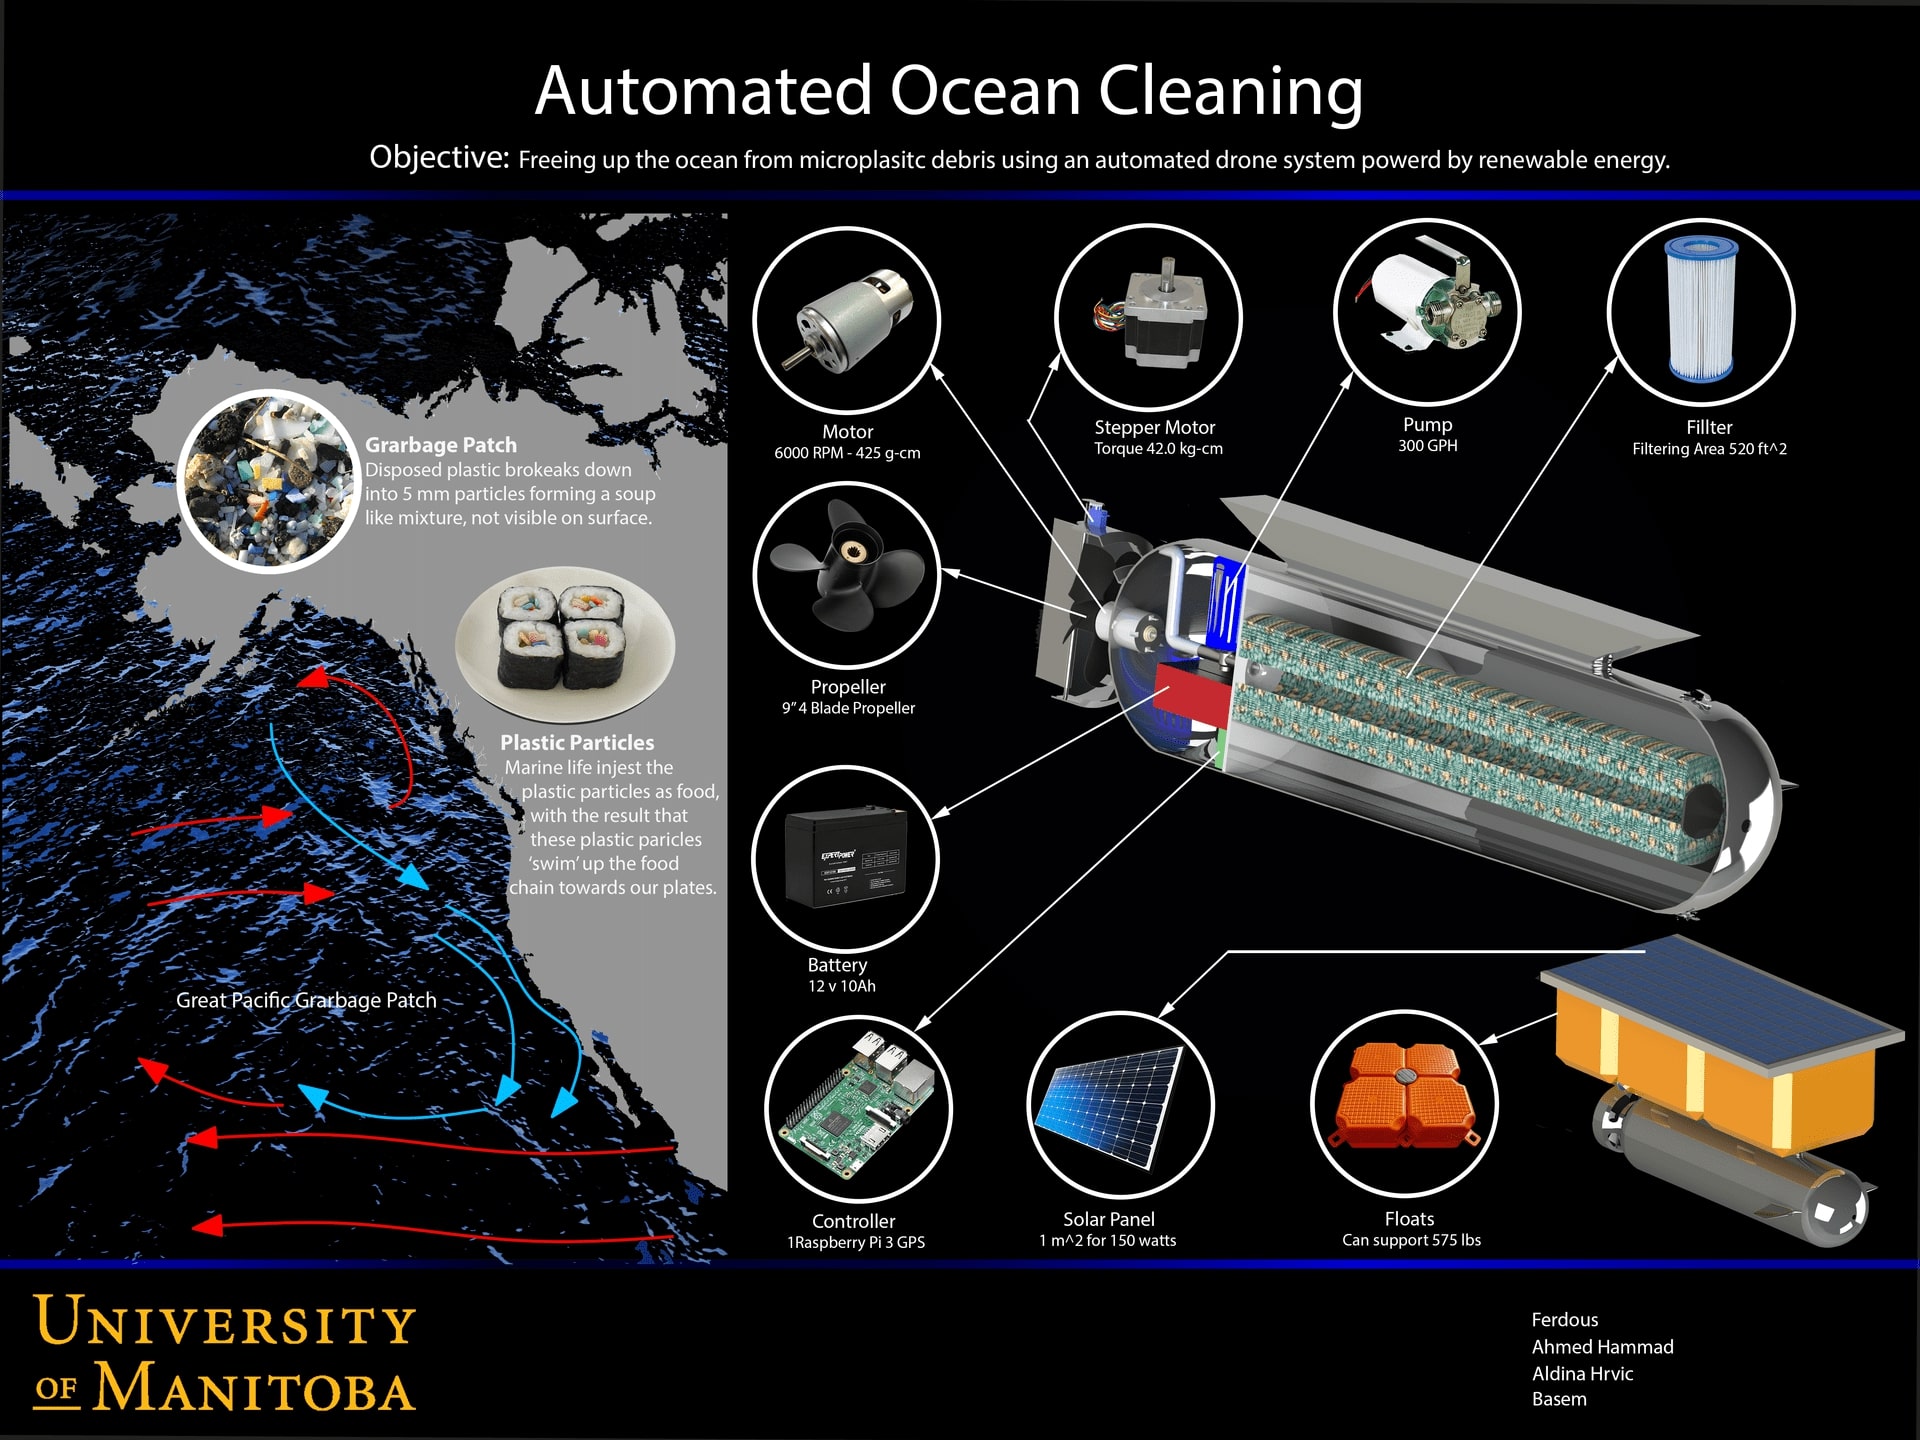 AUTOMATED OCEAN CLEANER